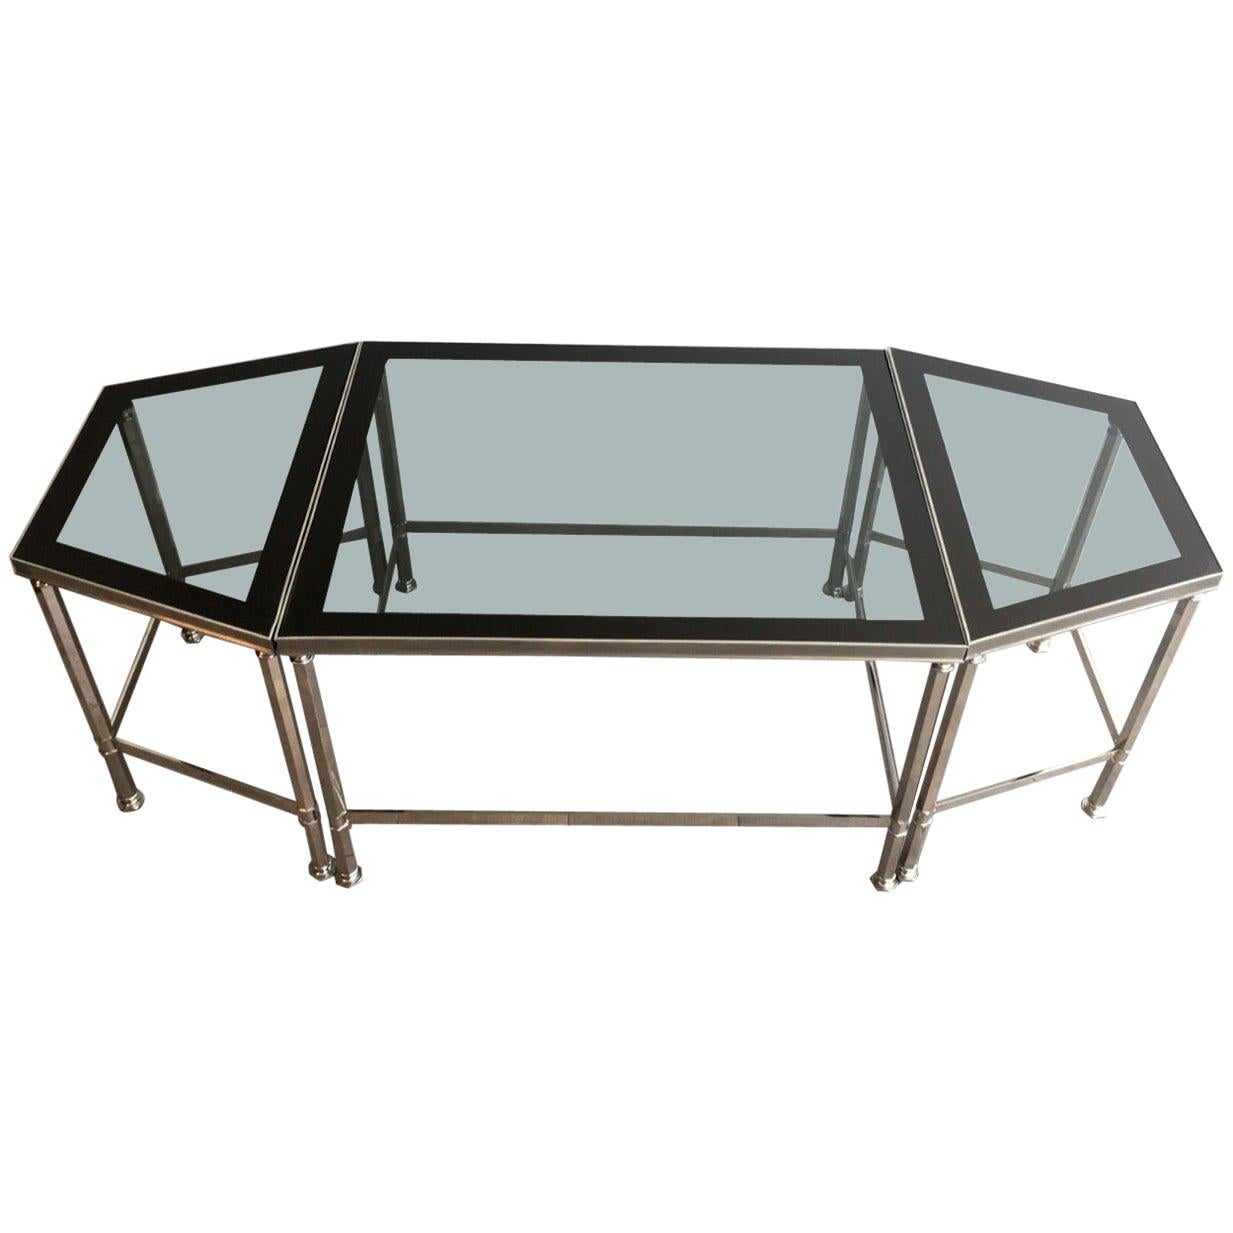 Rare Nickeled Tripartie Coffee Table with Glass Tops Lacquered All Around